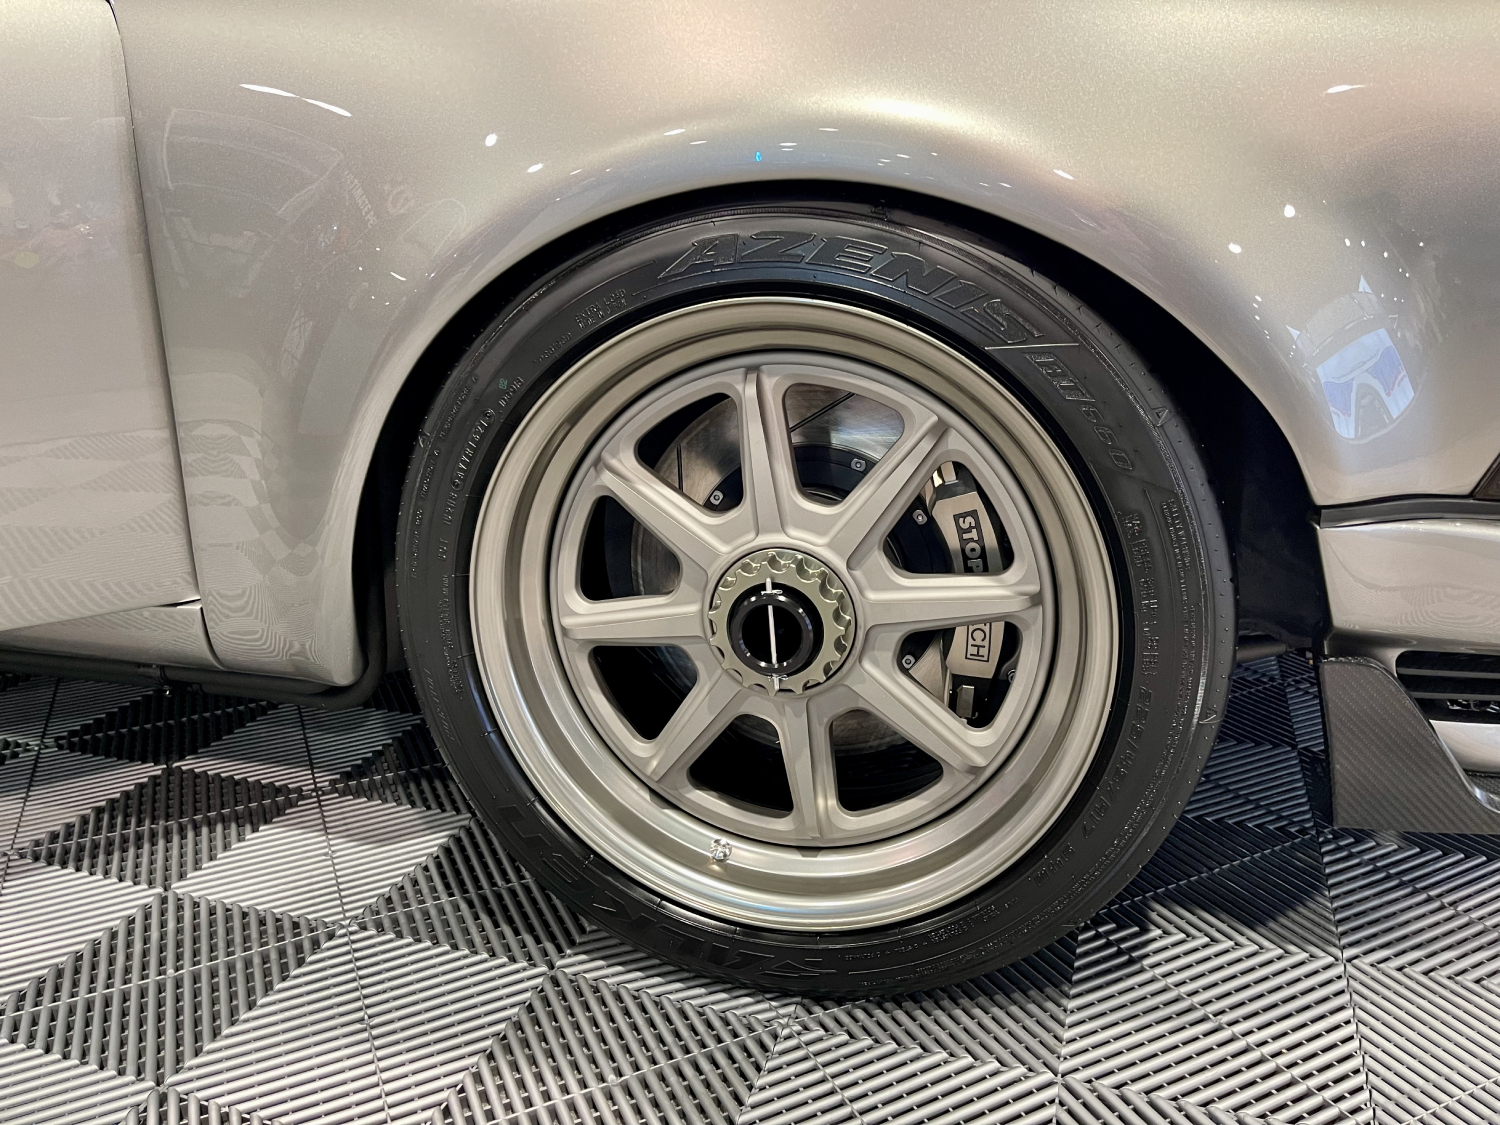 The CSF Cooling Porshe 911 has three-piece wheels by Rotiform